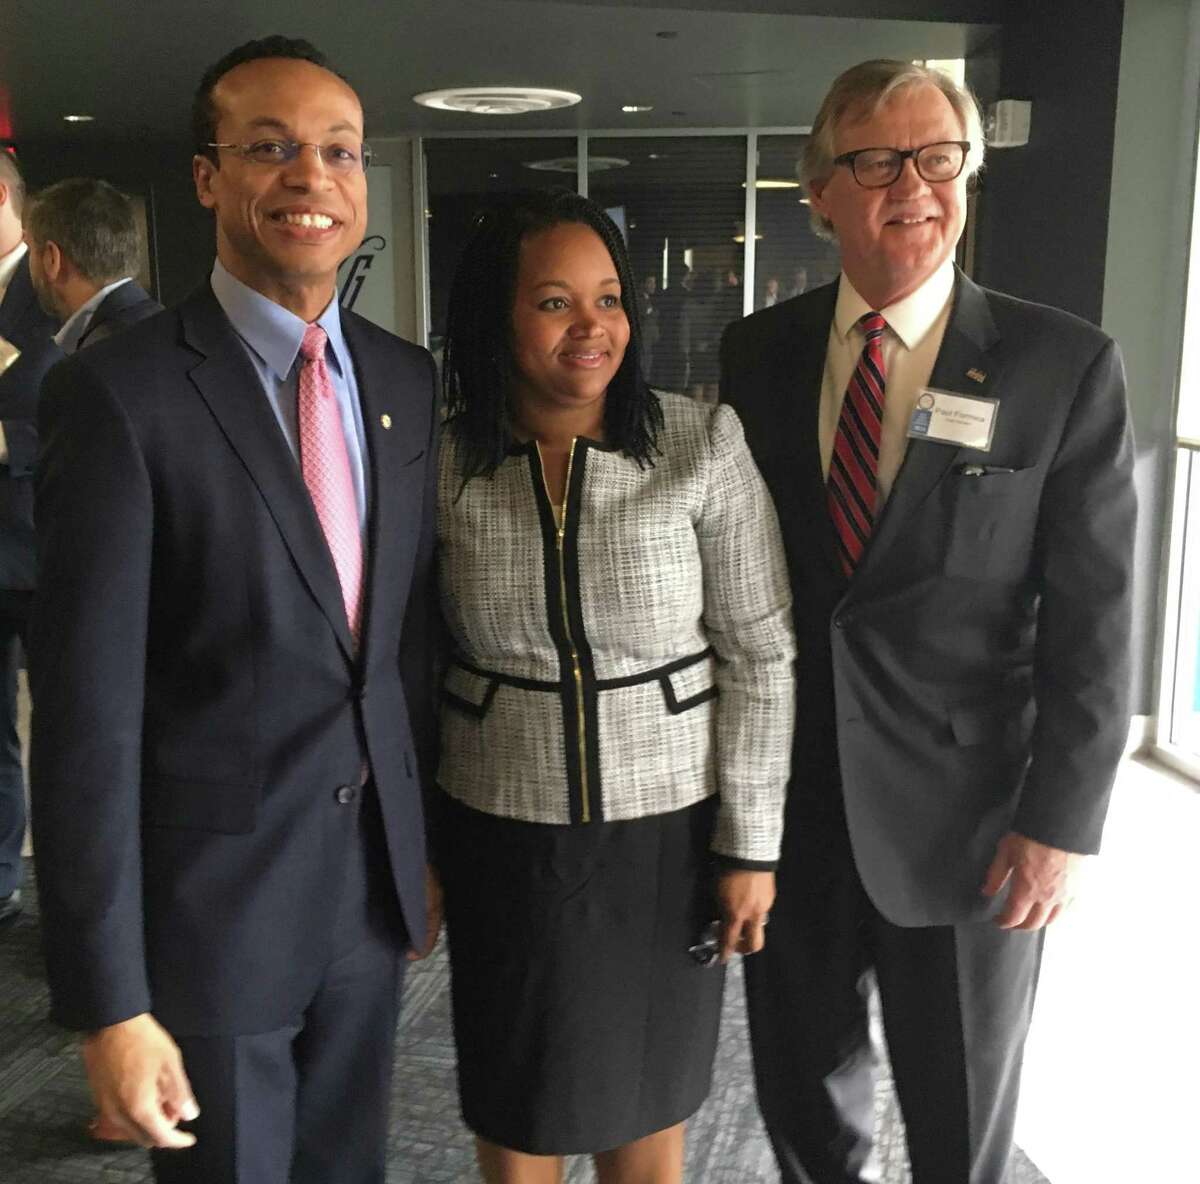 State Treasurer Shawn Wooden, Melissa McCaw, the governor's budget and policy chief and Sen. Paul Formica, R-East Lyme, at the Treasurer's annual debt and pension conference Friday in Hartford.